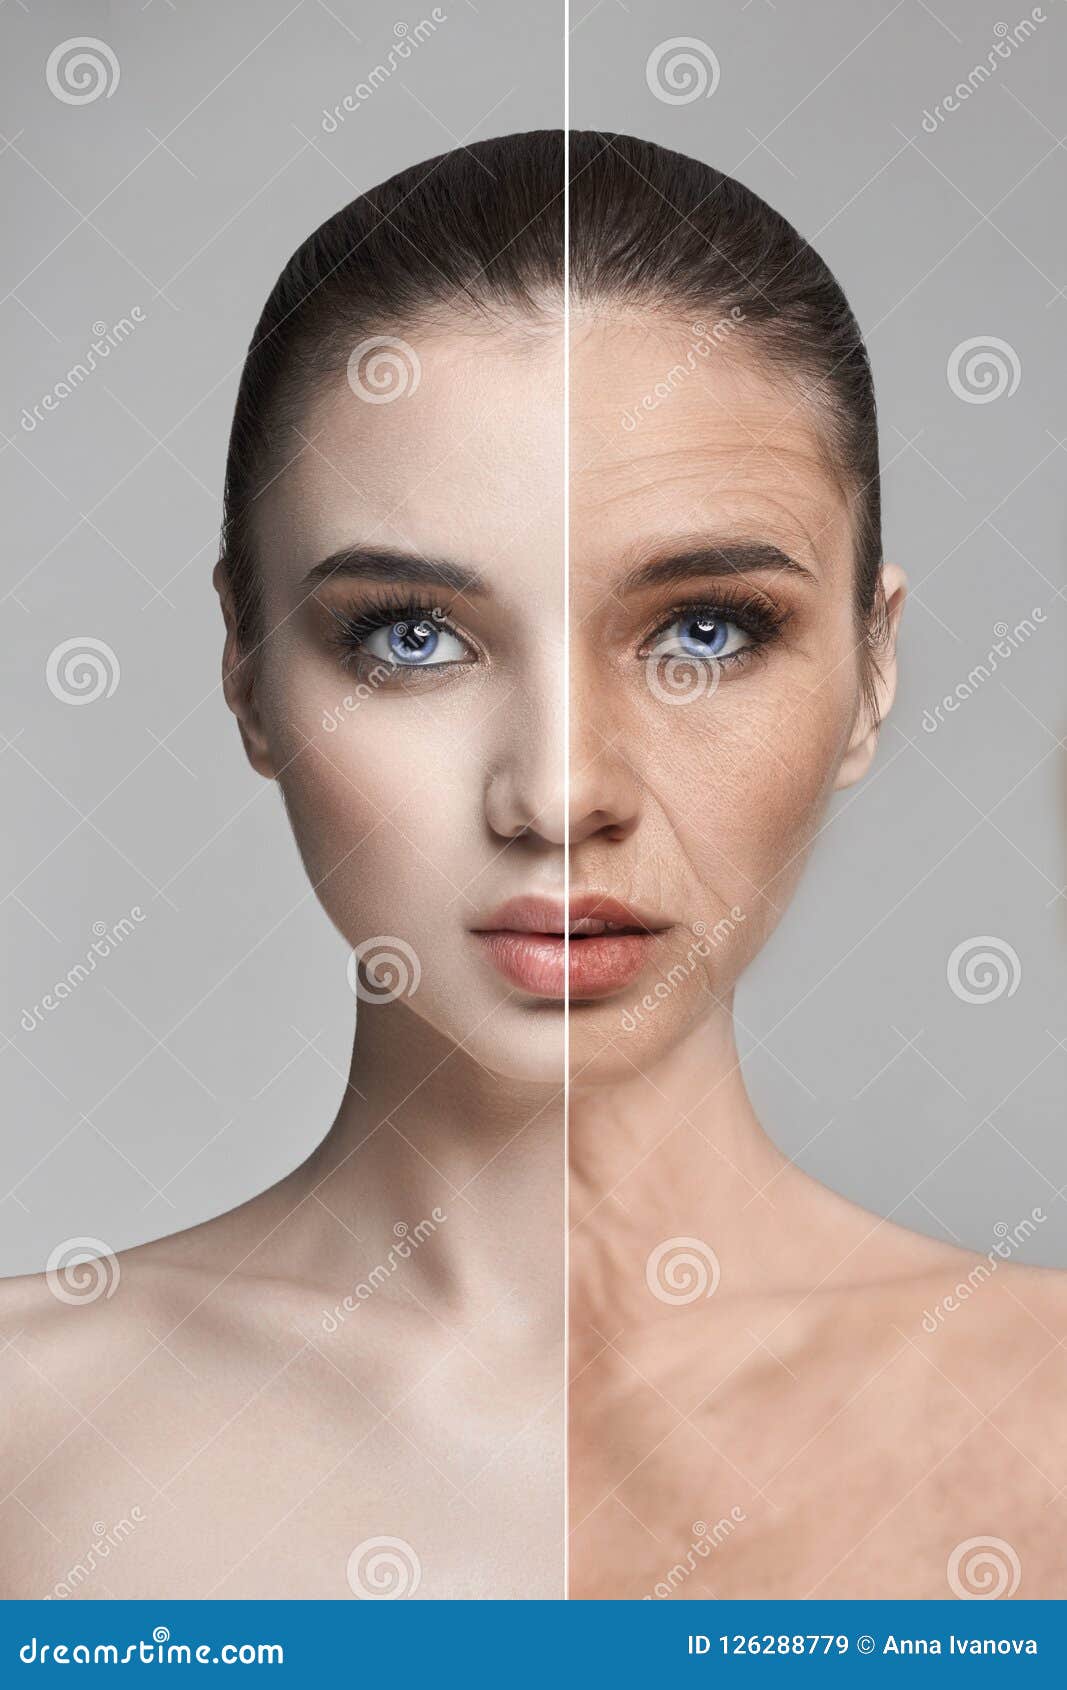 skin aging, wrinkles, woman facial rejuvenation. skin care, recovery and regeneration of the skin. before and after. woman aging